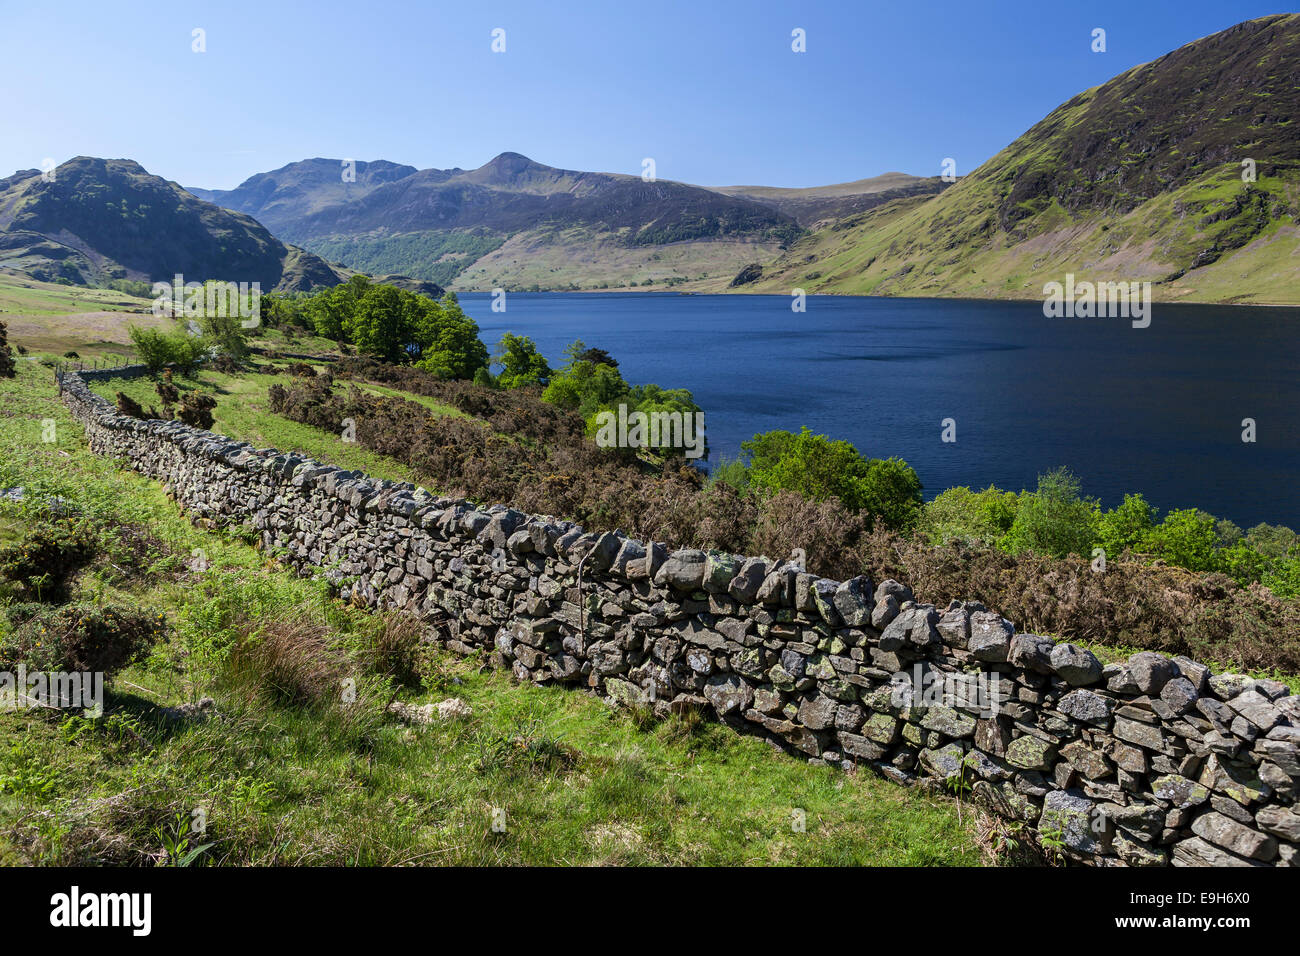 View over an old English stone wall towards the blue lake of Crummock Water, Lake District National Park, Cumbria, England Stock Photo